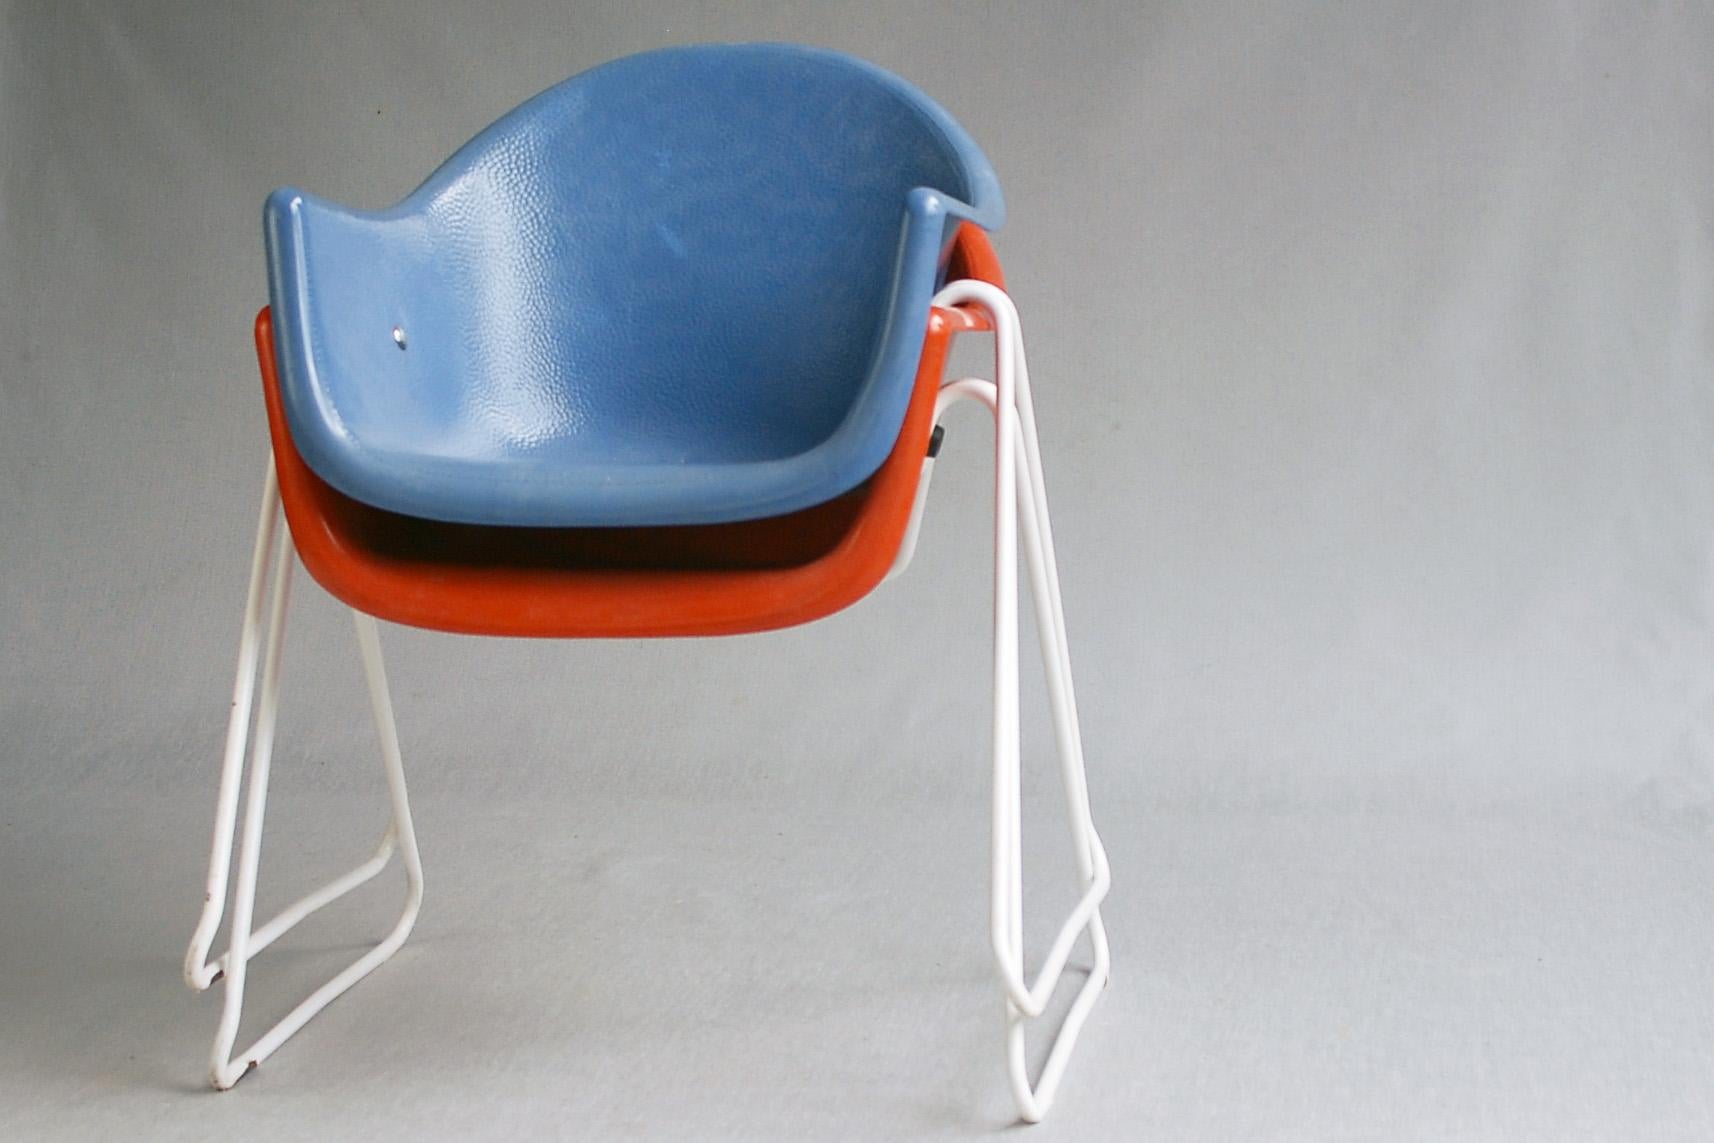 Pair of Walter Papst kids chairs, Wilkhahn, Germany 1961 - 1968 For Sale 4